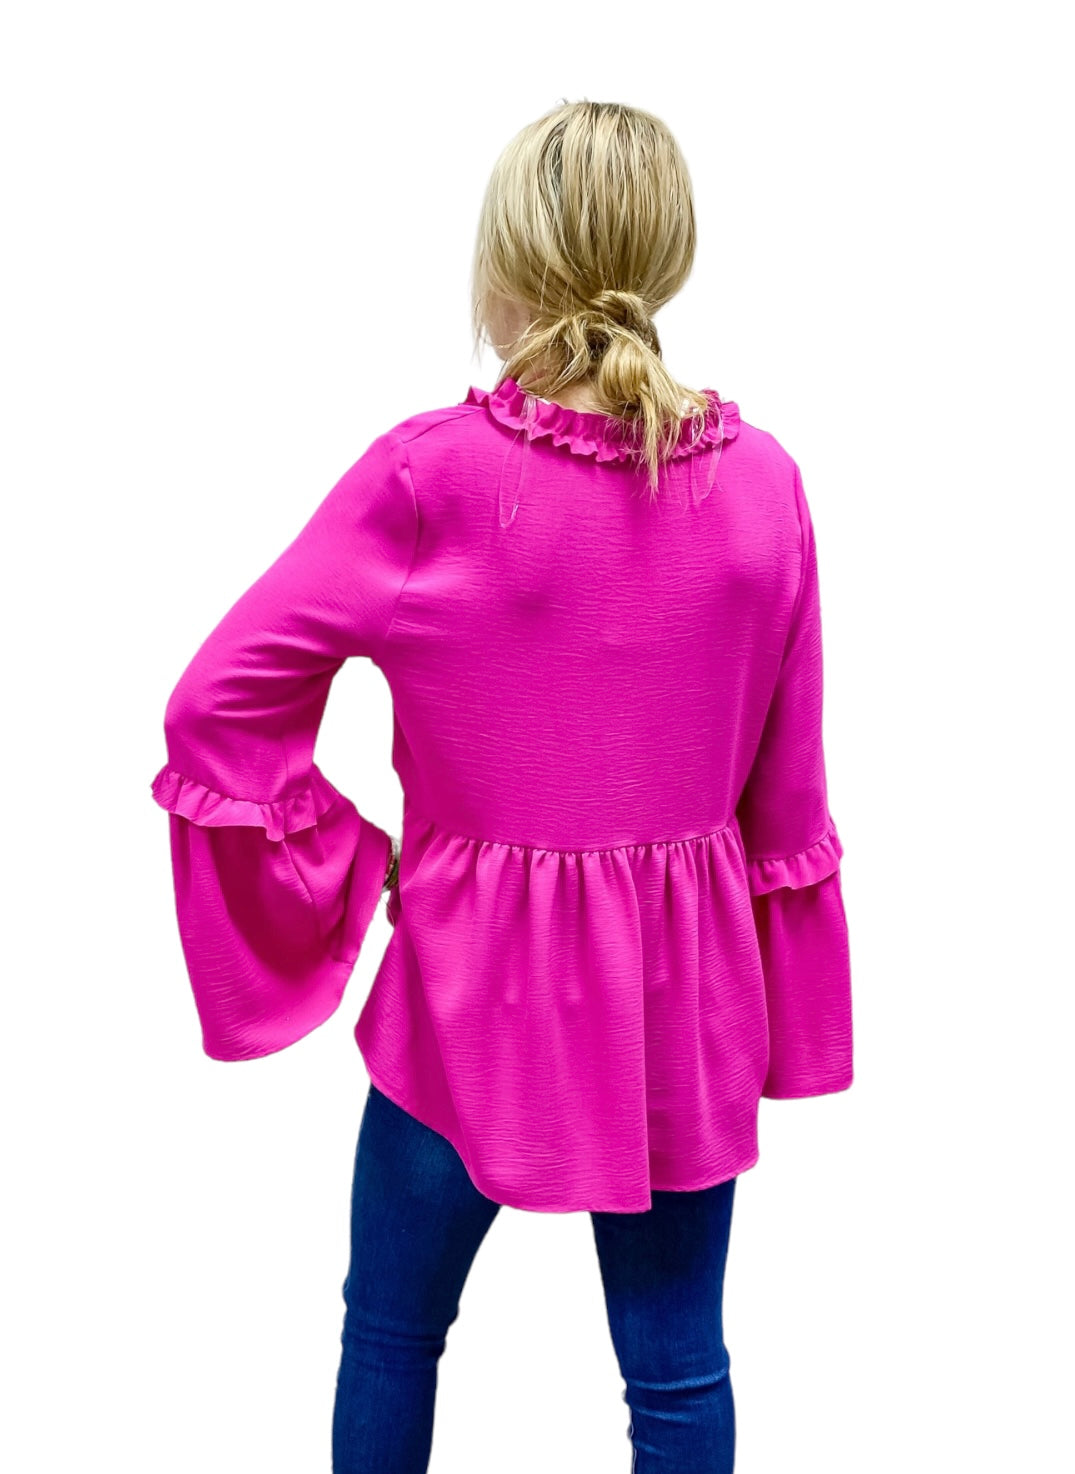 Meet You There Ruffled Tunic, Hot Pink